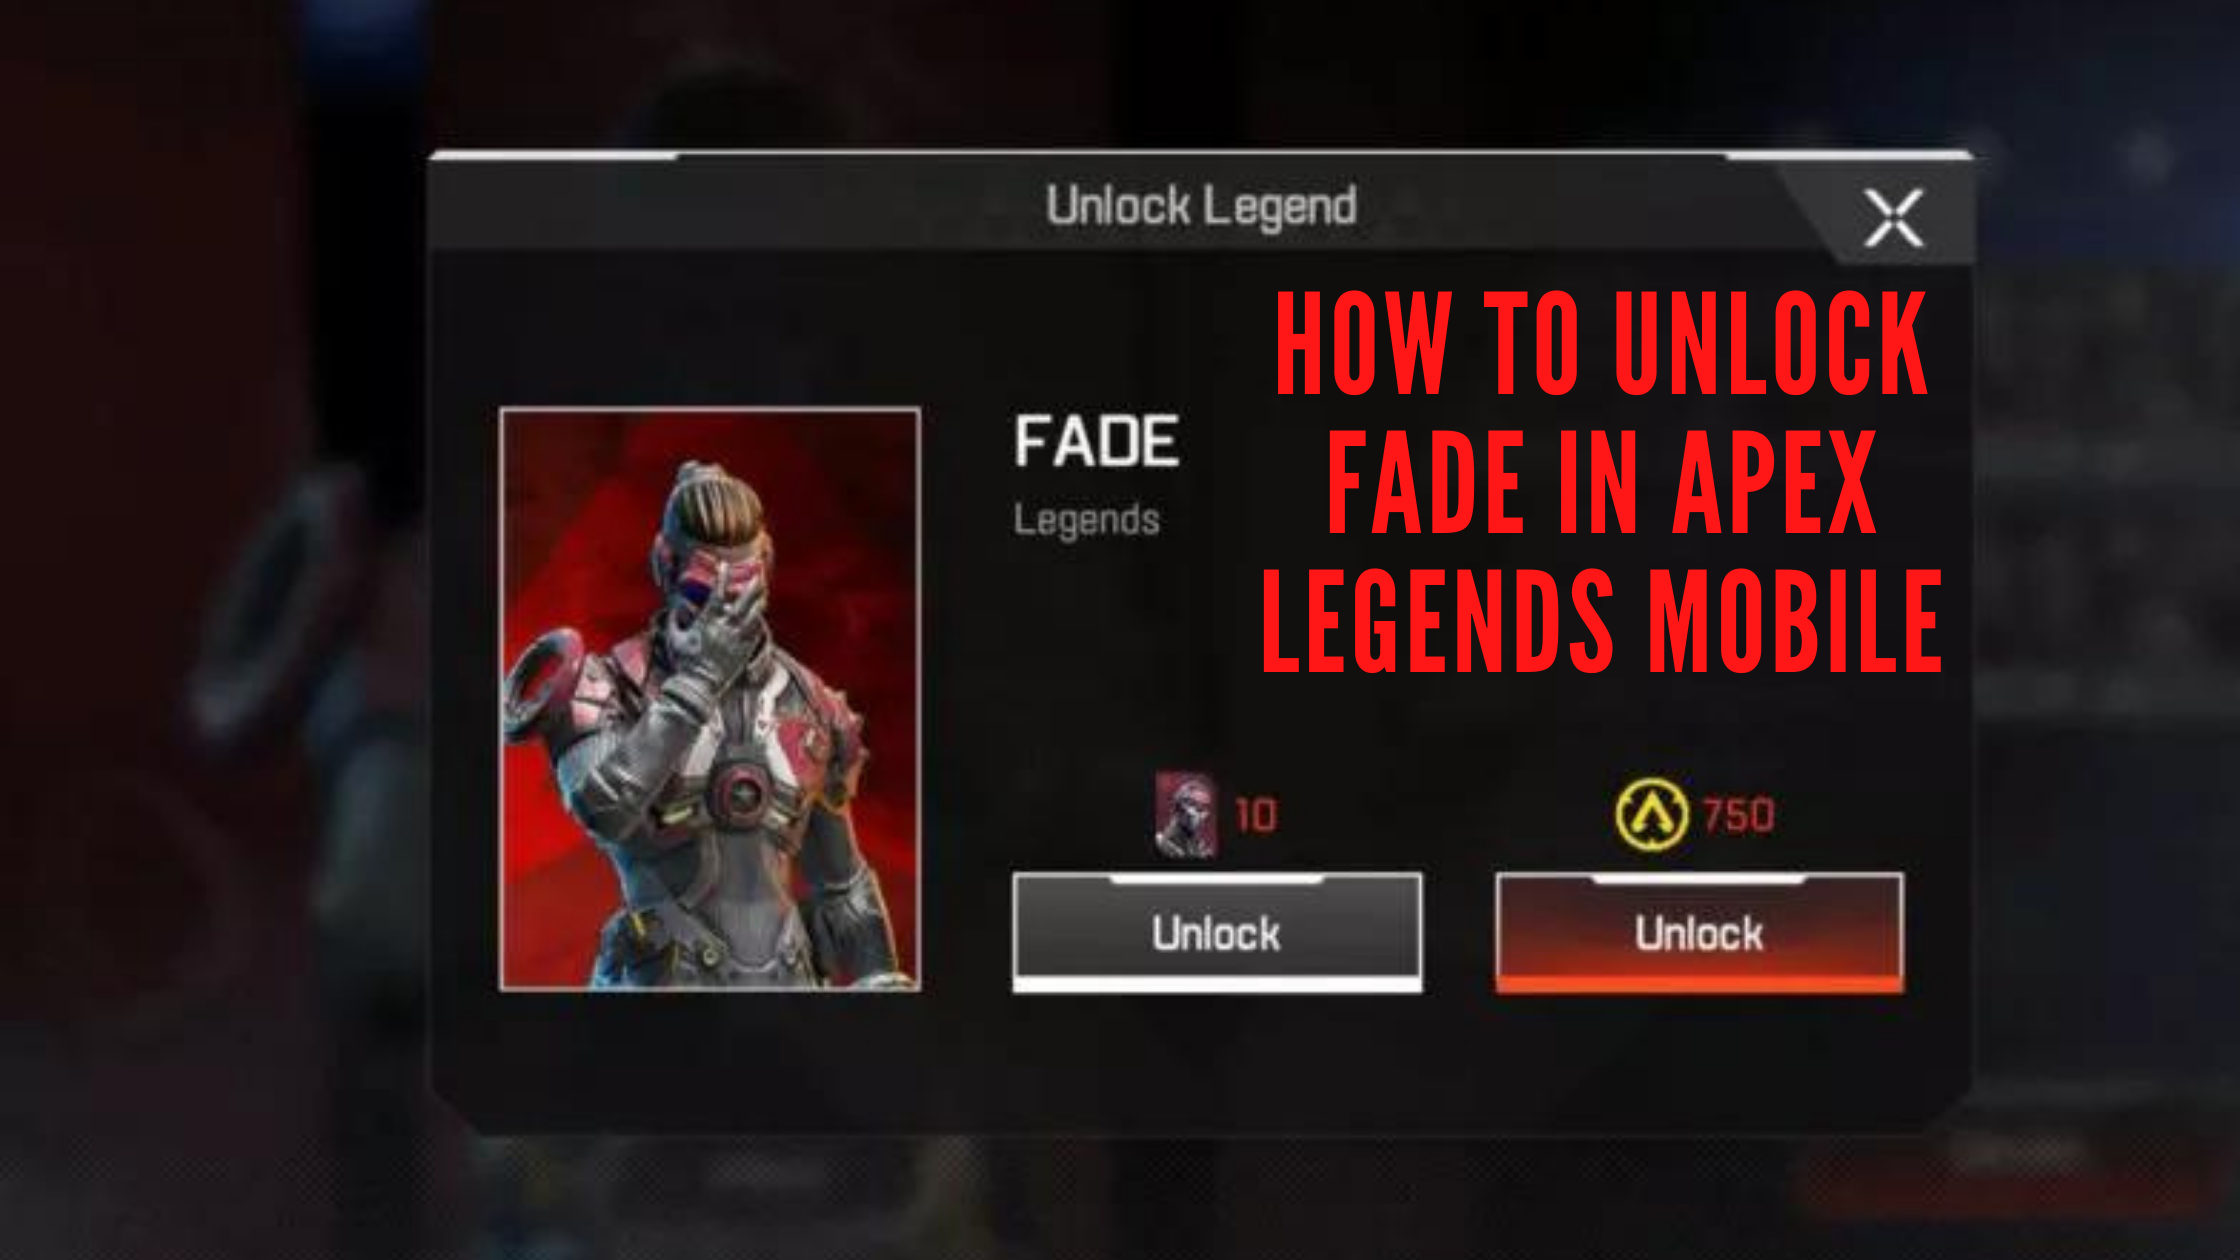 How To Unlock Fade In Apex Legends Mobile